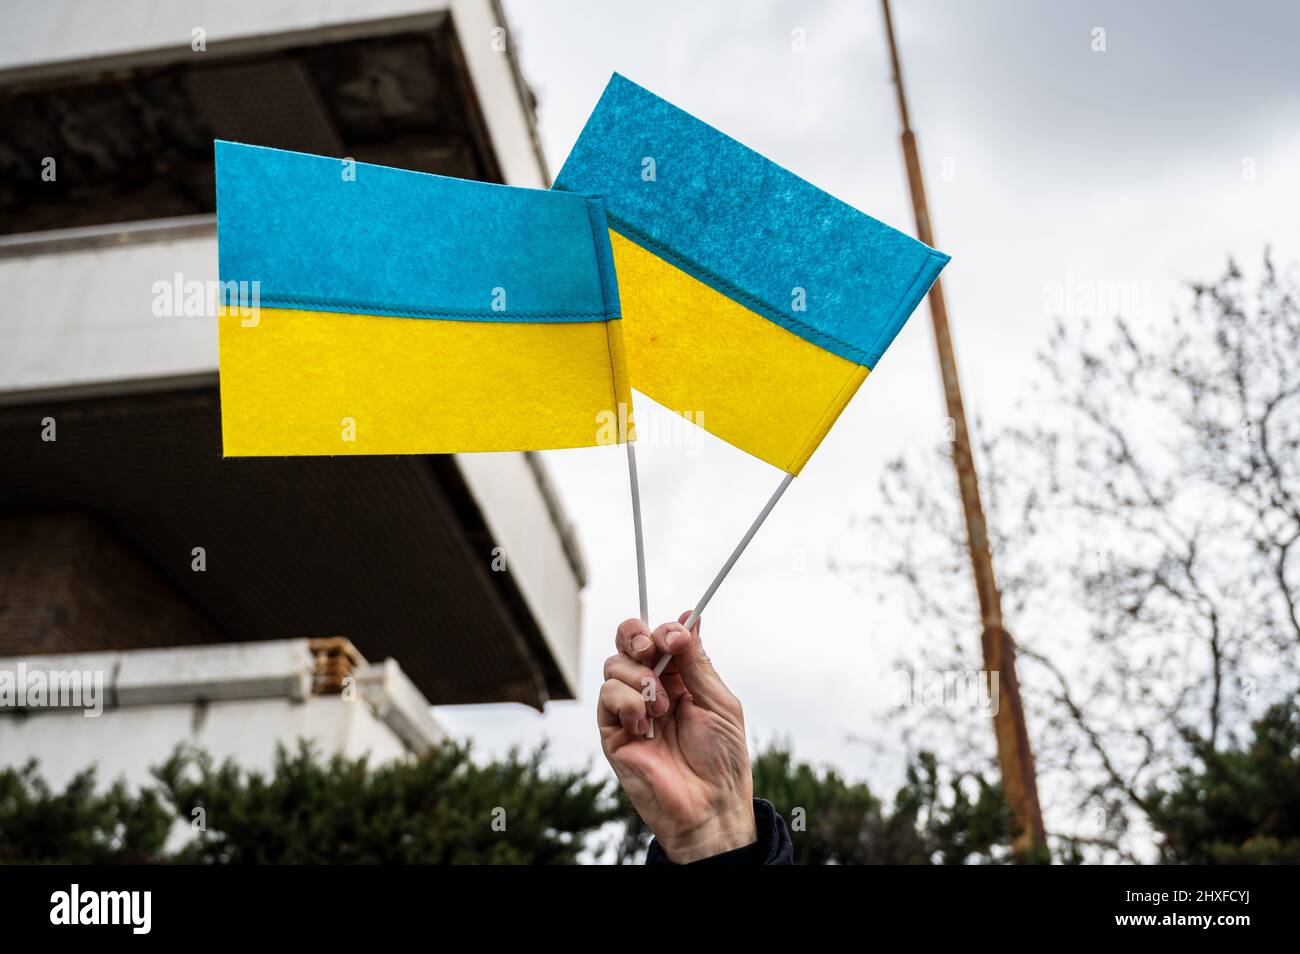 Madrid, Spain. 12th Mar, 2022. Ukrainian flags are seen during a protest against war. Ukrainians and Russians living in Madrid gathered to protest in front of the Russian embassy against the Russian invasion of Ukraine demanding the end of war. Credit: Marcos del Mazo/Alamy Live News Stock Photo